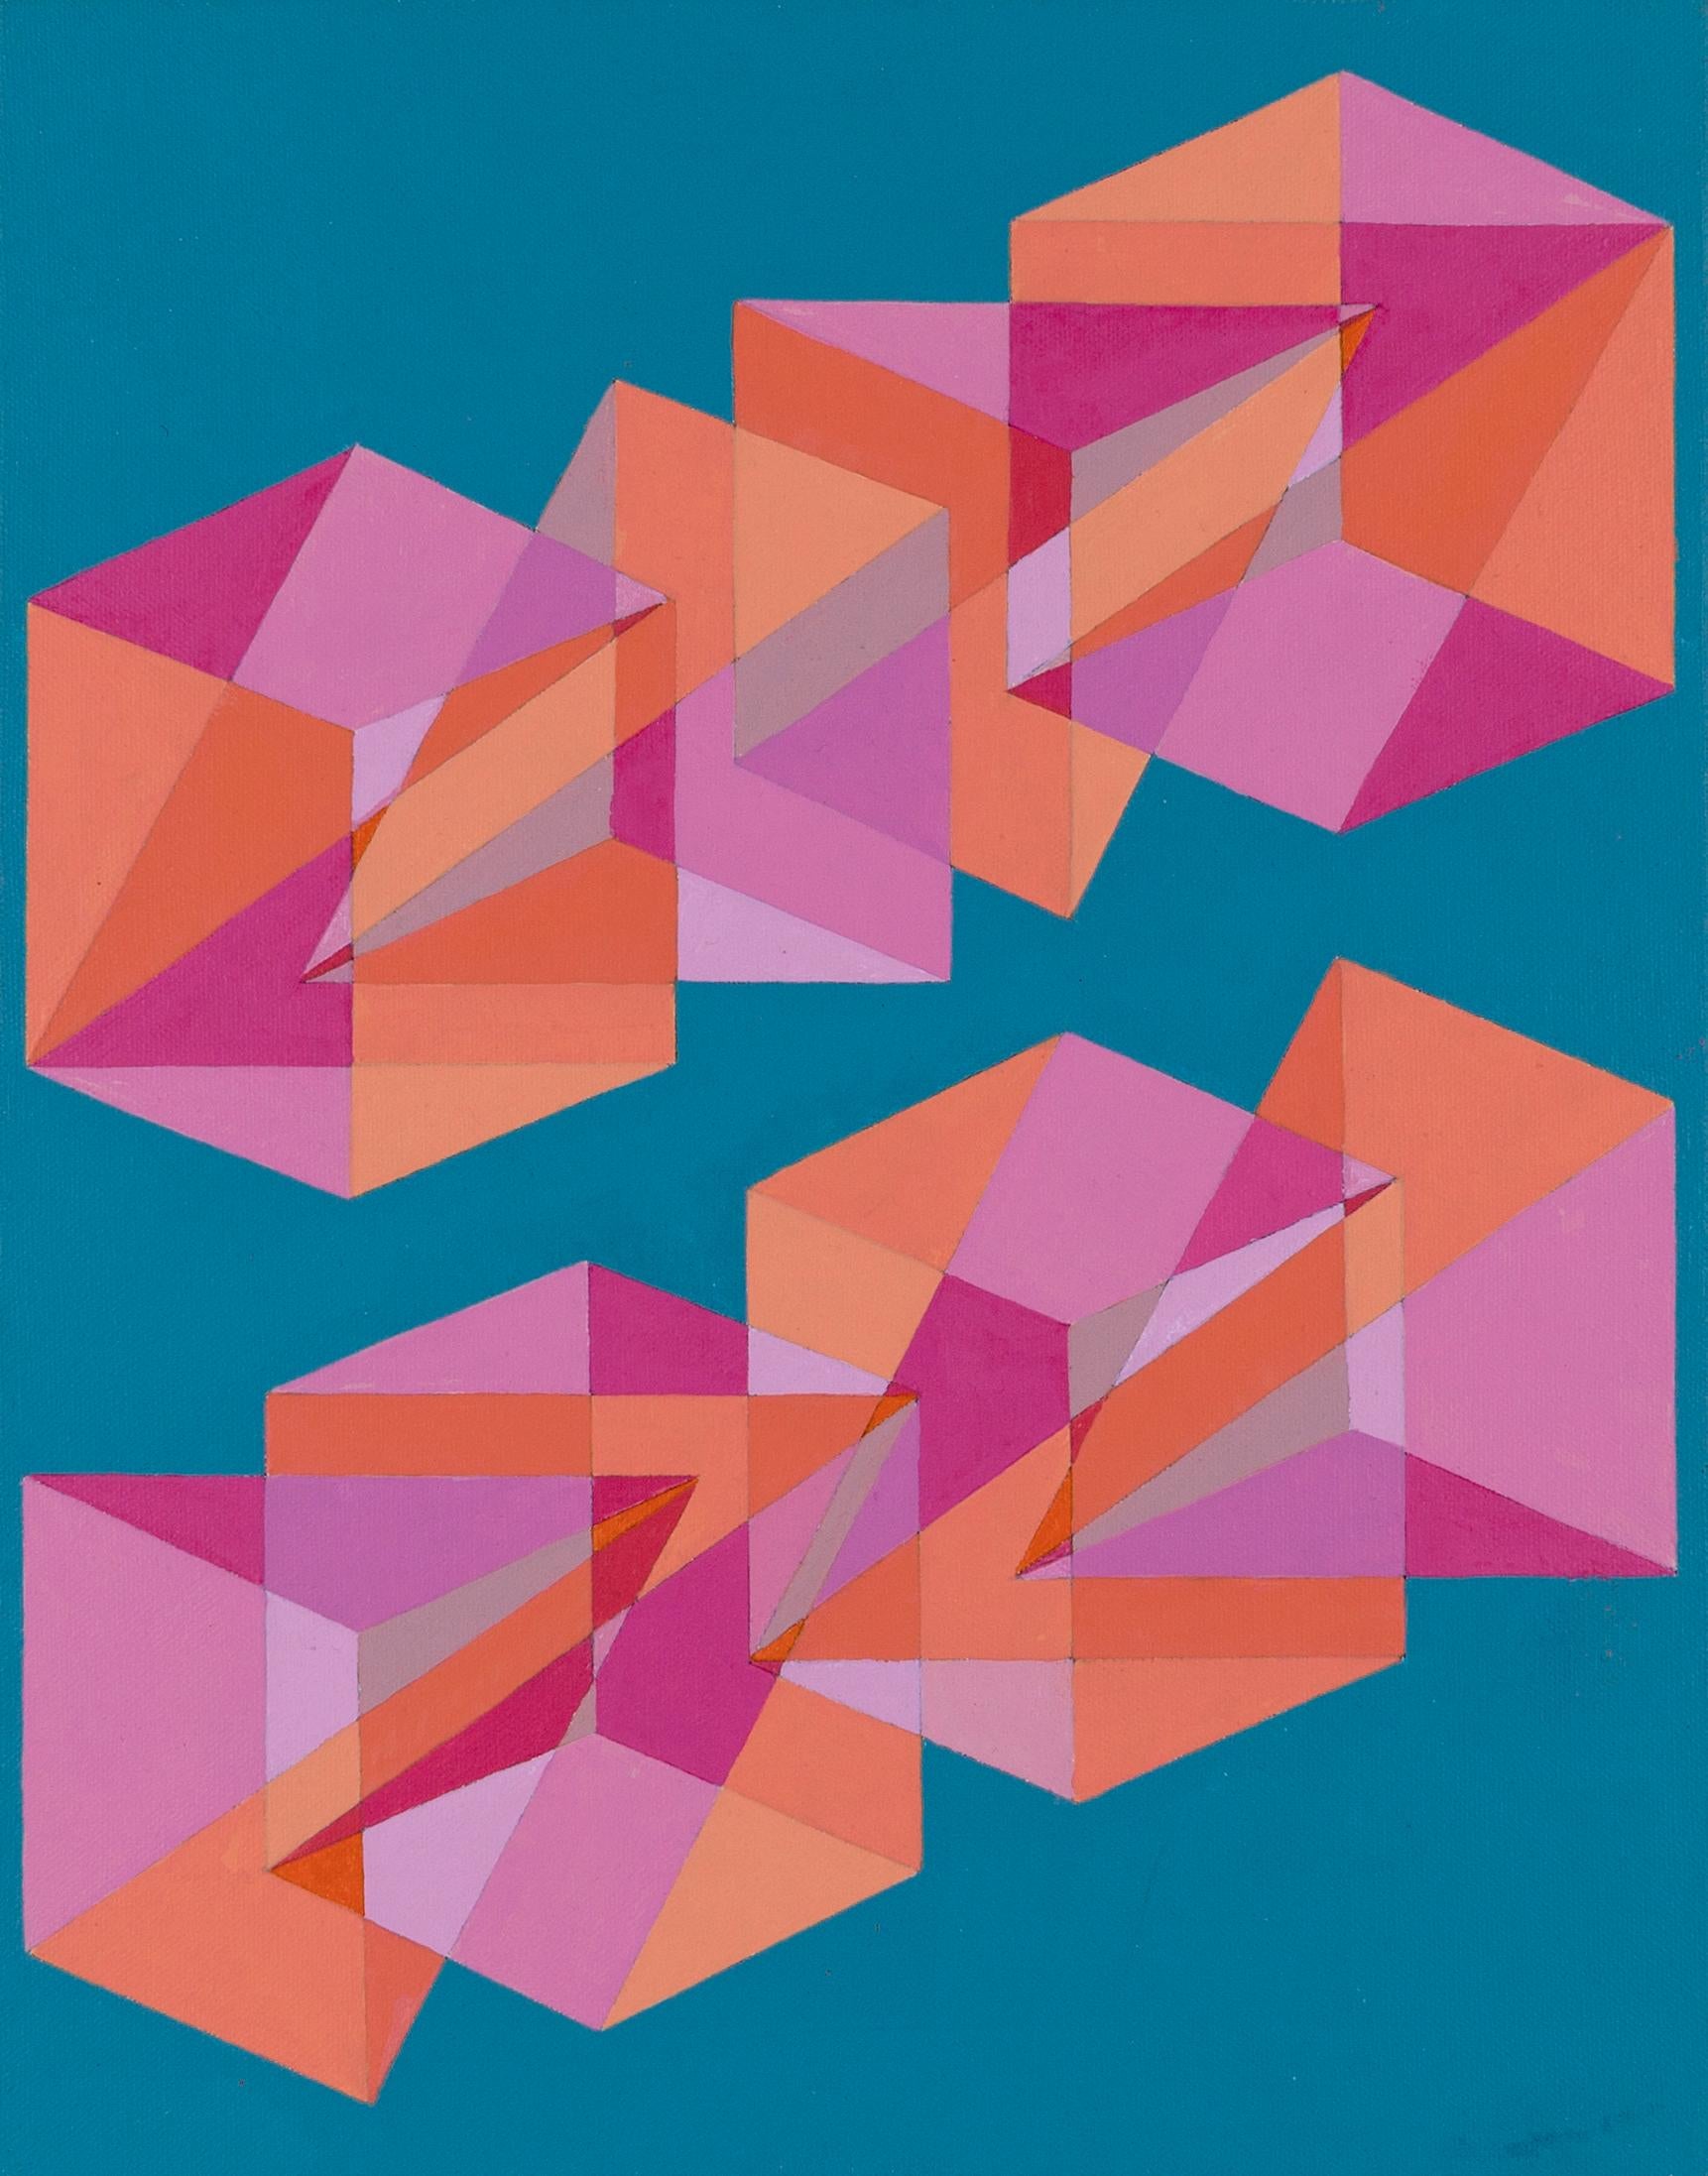 Cubes Divided Equally into Three #6: abstract geometric painting w/ pink & blue